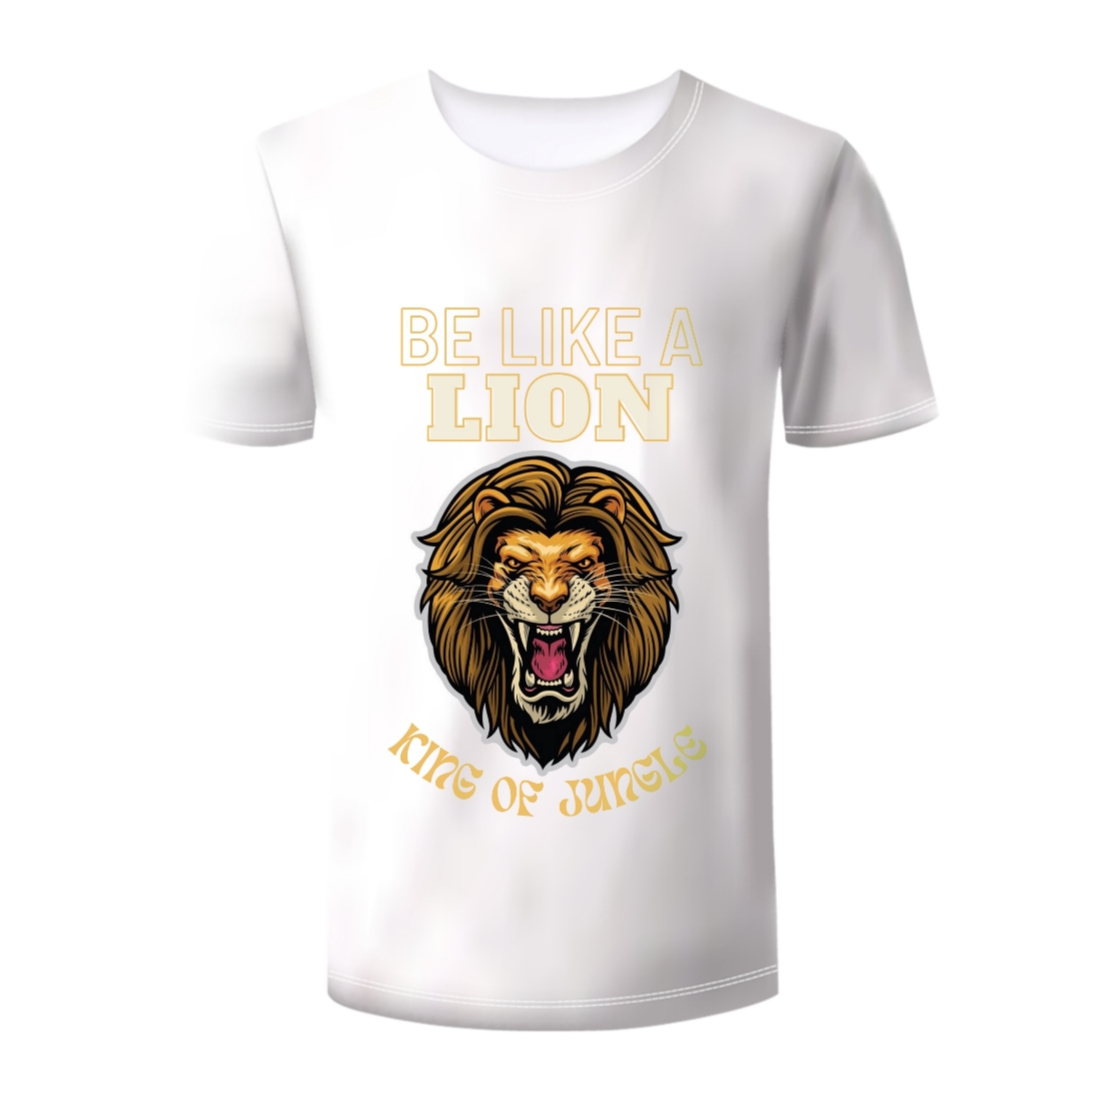 White t - shirt with a lion's face on it.